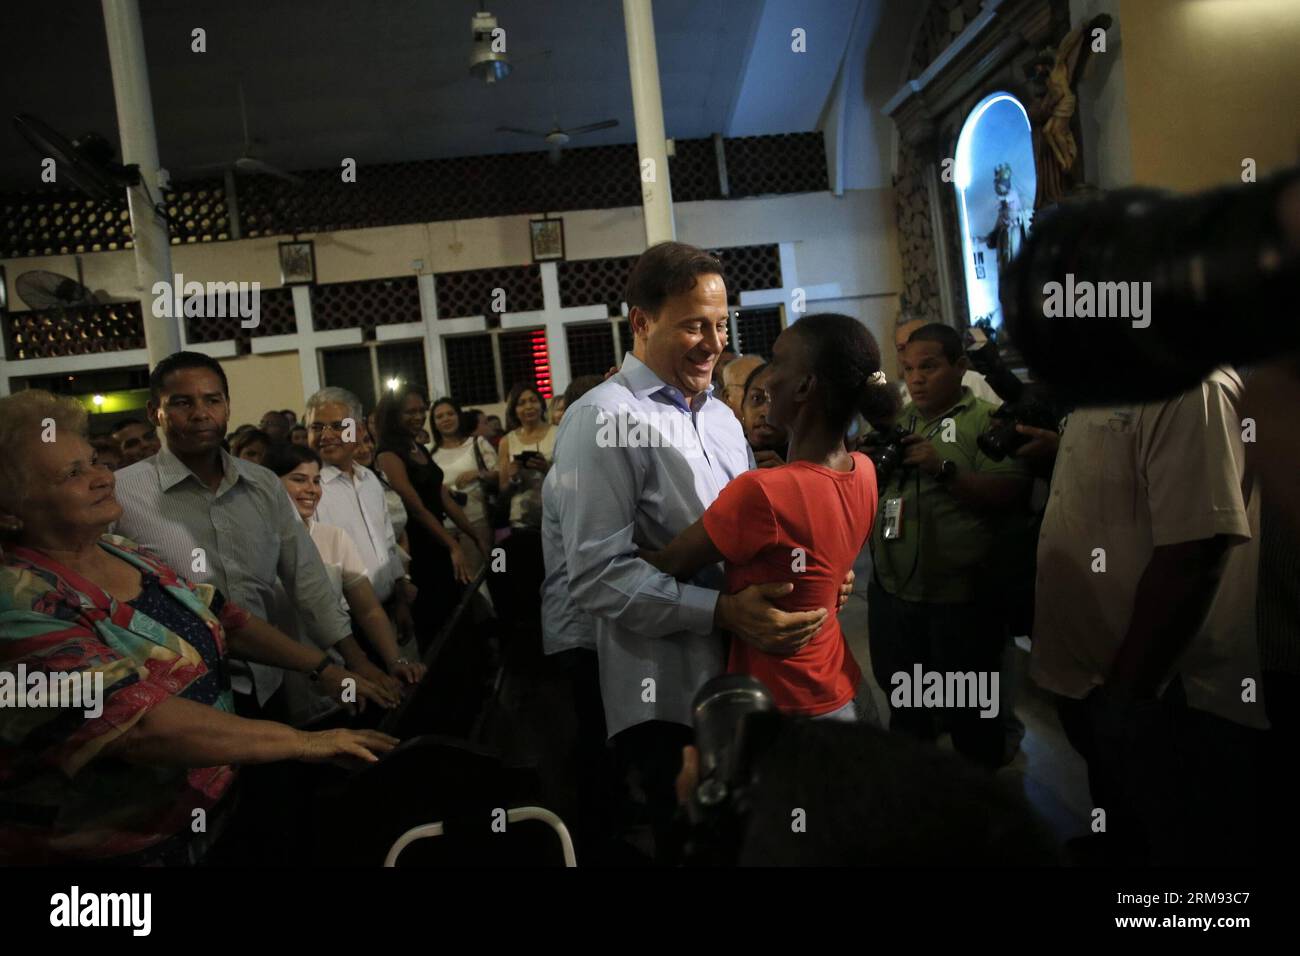 PANAMA CITY, May 5, 2014 (Xinhua) -- Panama s President-elect Juan Carlos Varela (C) greets a supporter upon his arrival at a mass in Panama City, capital of Panama, May 5, 2014. Juan Carlos Varela from the opposition Panamenista Party won the presidential election, Supreme Electoral Court President Erasmo Pinilla said on Sunday. (Xinhua/Mauricio Valenzuela)(zhf) PANAMA-PANAMA CITY-POLITICS-ELECTIONS-PRESIDENT PUBLICATIONxNOTxINxCHN   Panama City May 5 2014 XINHUA Panama S President elect Juan Carlos Varela C greets a Supporter UPON His Arrival AT a Mass in Panama City Capital of Panama May 5 Stock Photo